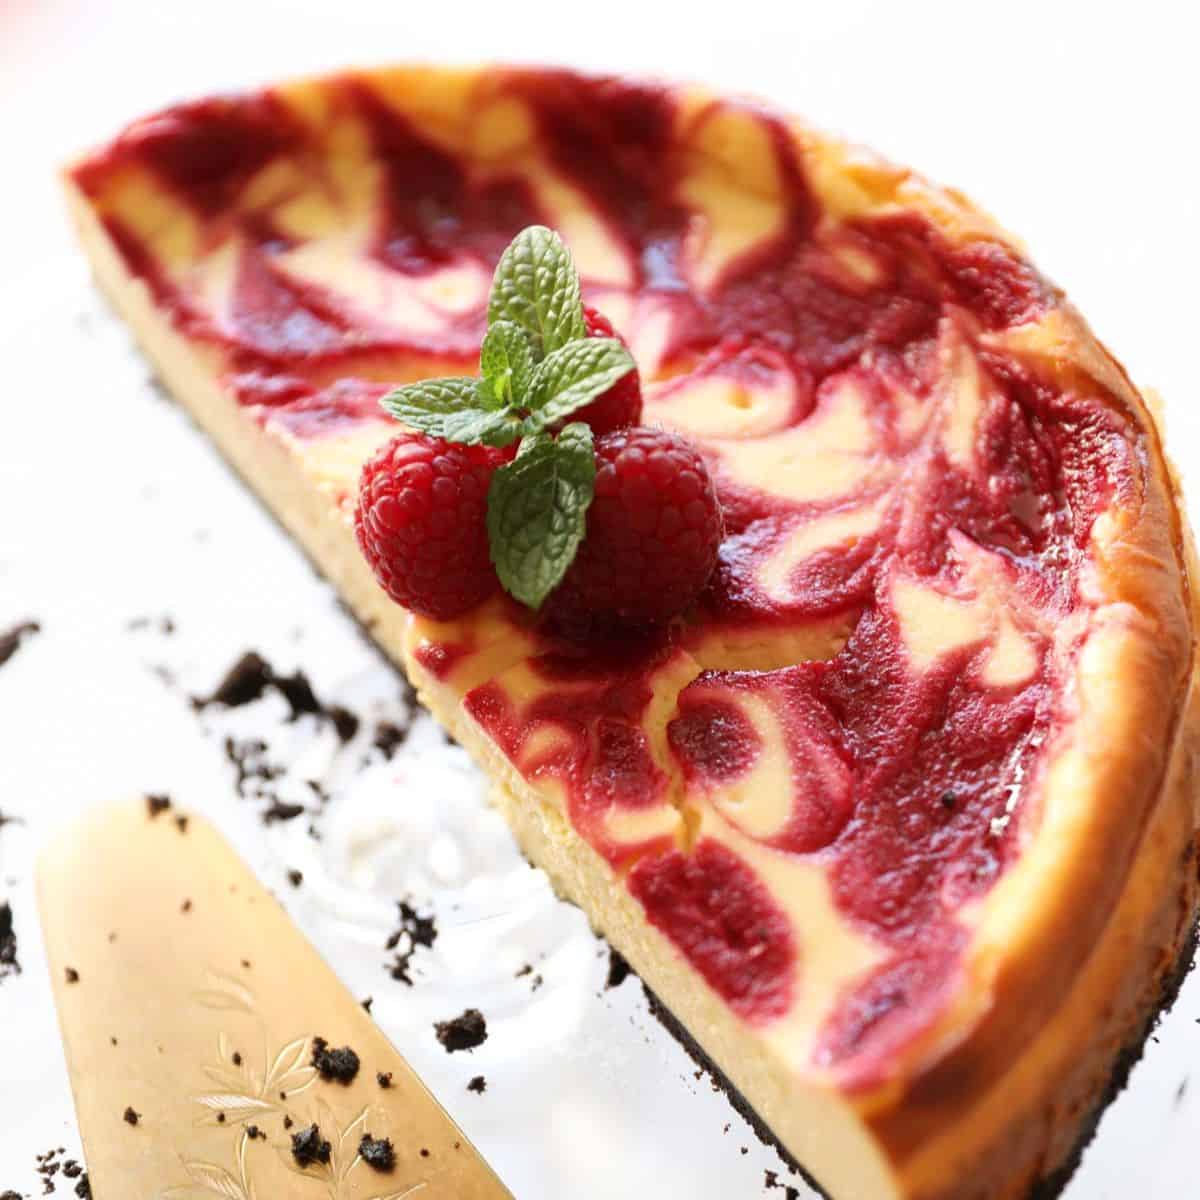 a baked cheesecake with a swirl of raspberry in it on a cakestand